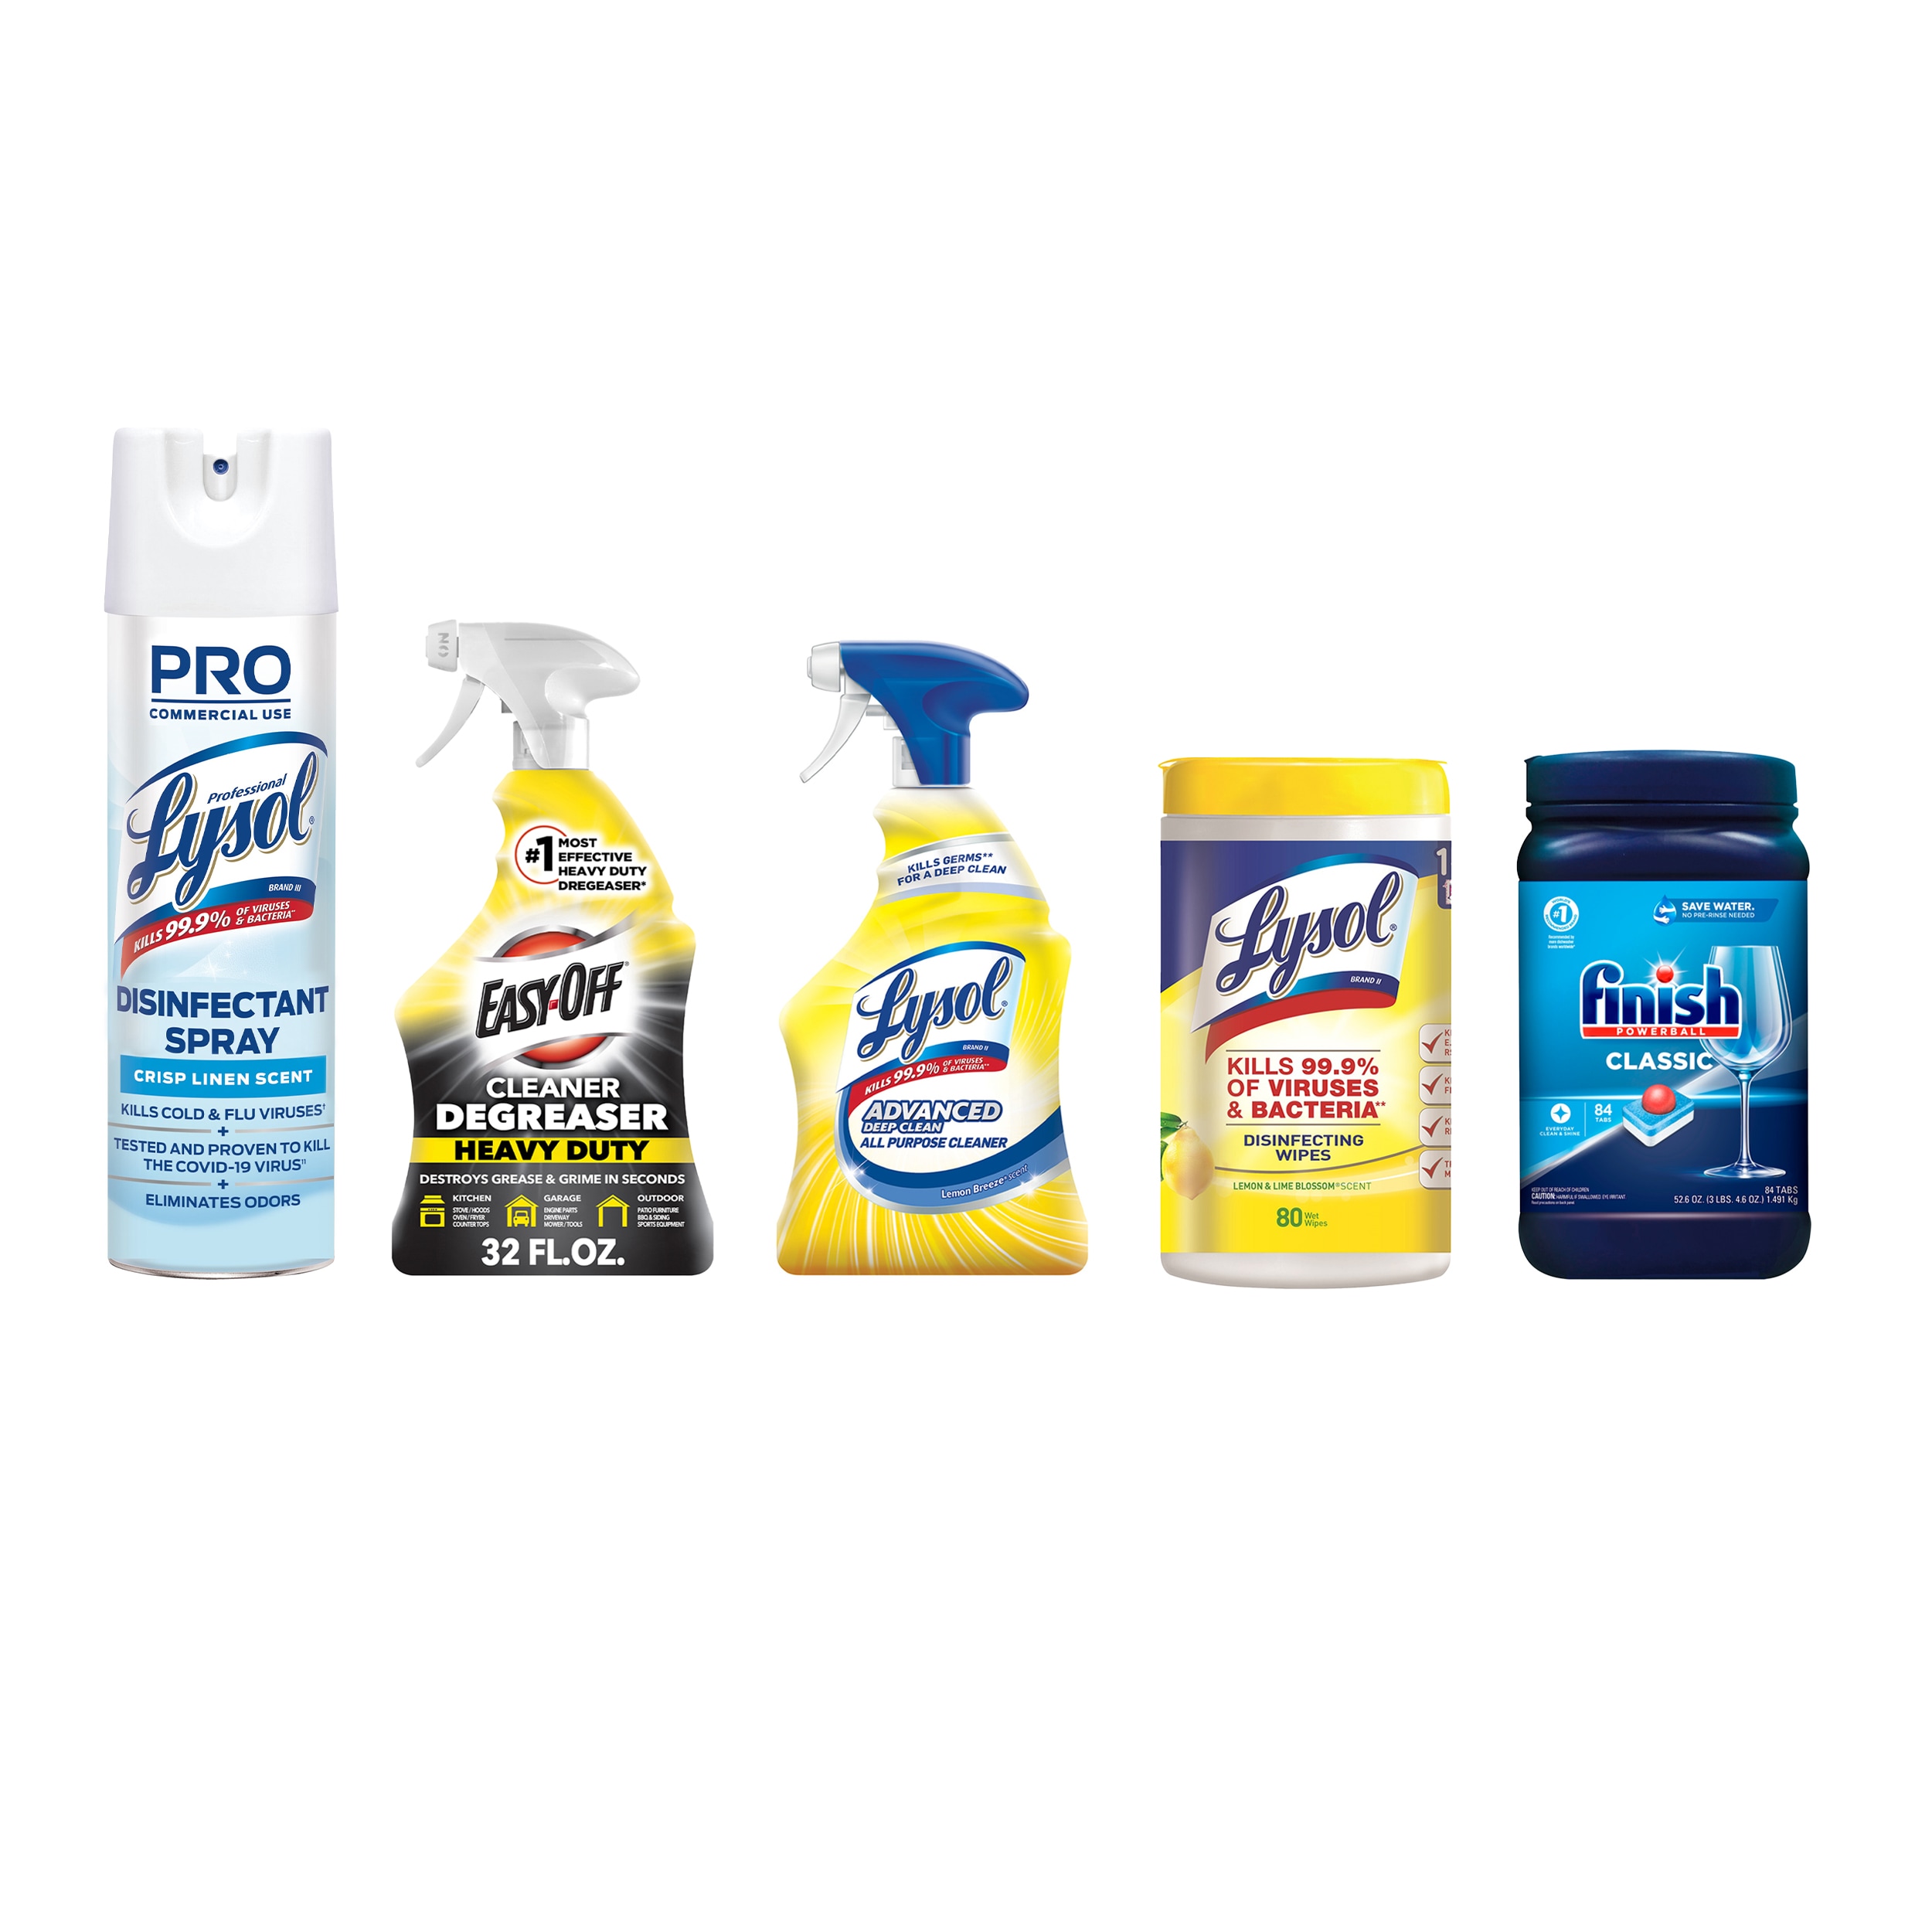 Free Cleaning Supplies for Low Income Families